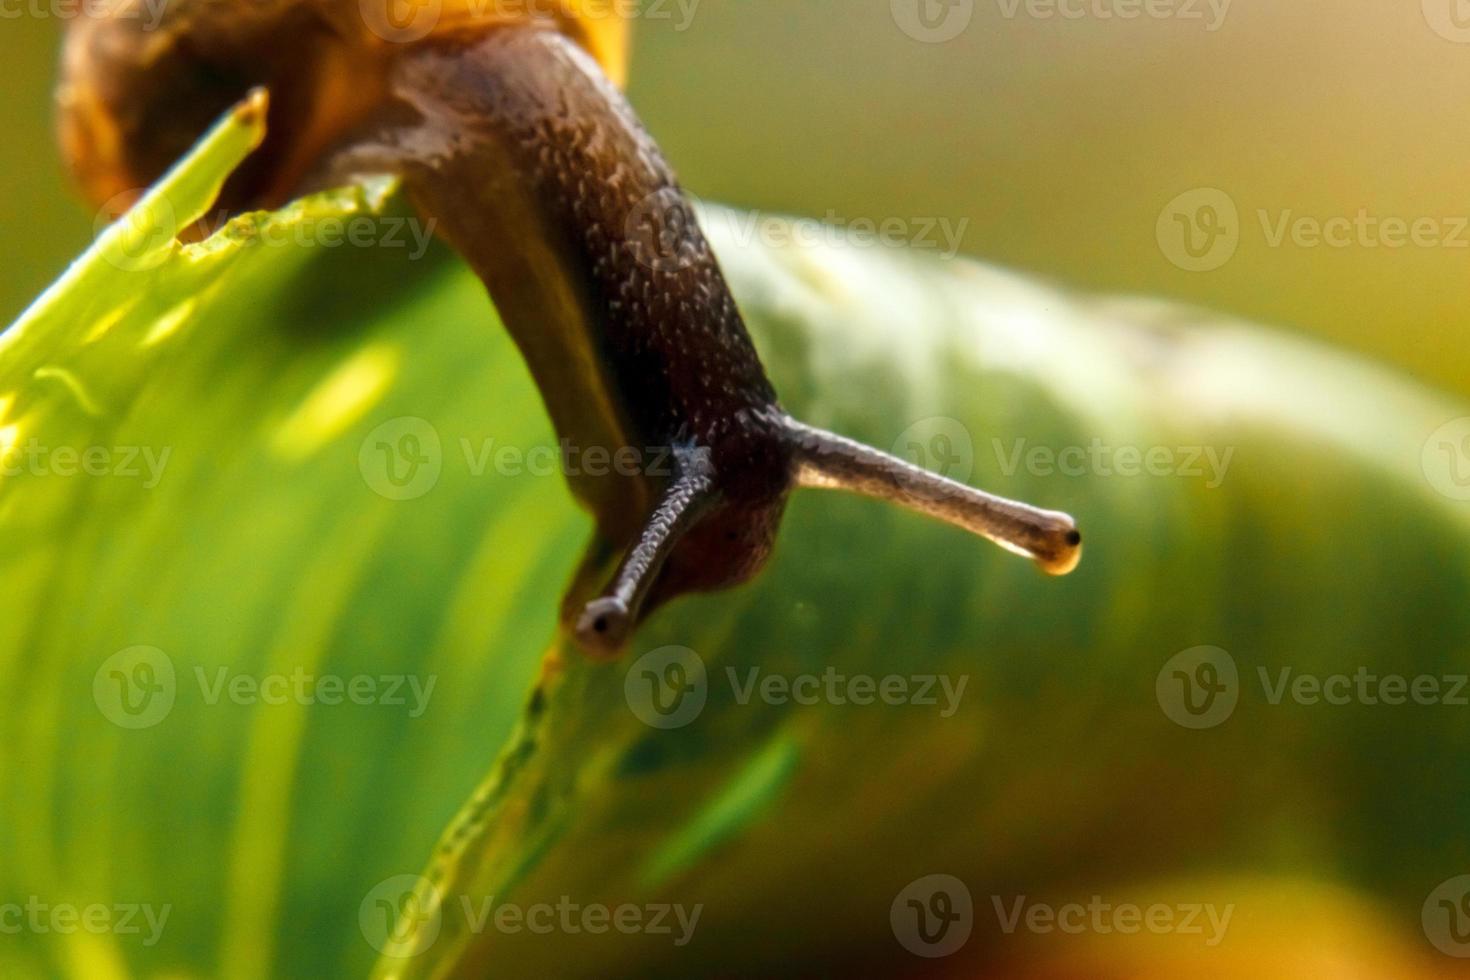 Snail closeup portrait. Little snail in shell crawling on green leaf in garden. Inspirational natural spring or summer background. Life of insect. Macro, close up photo